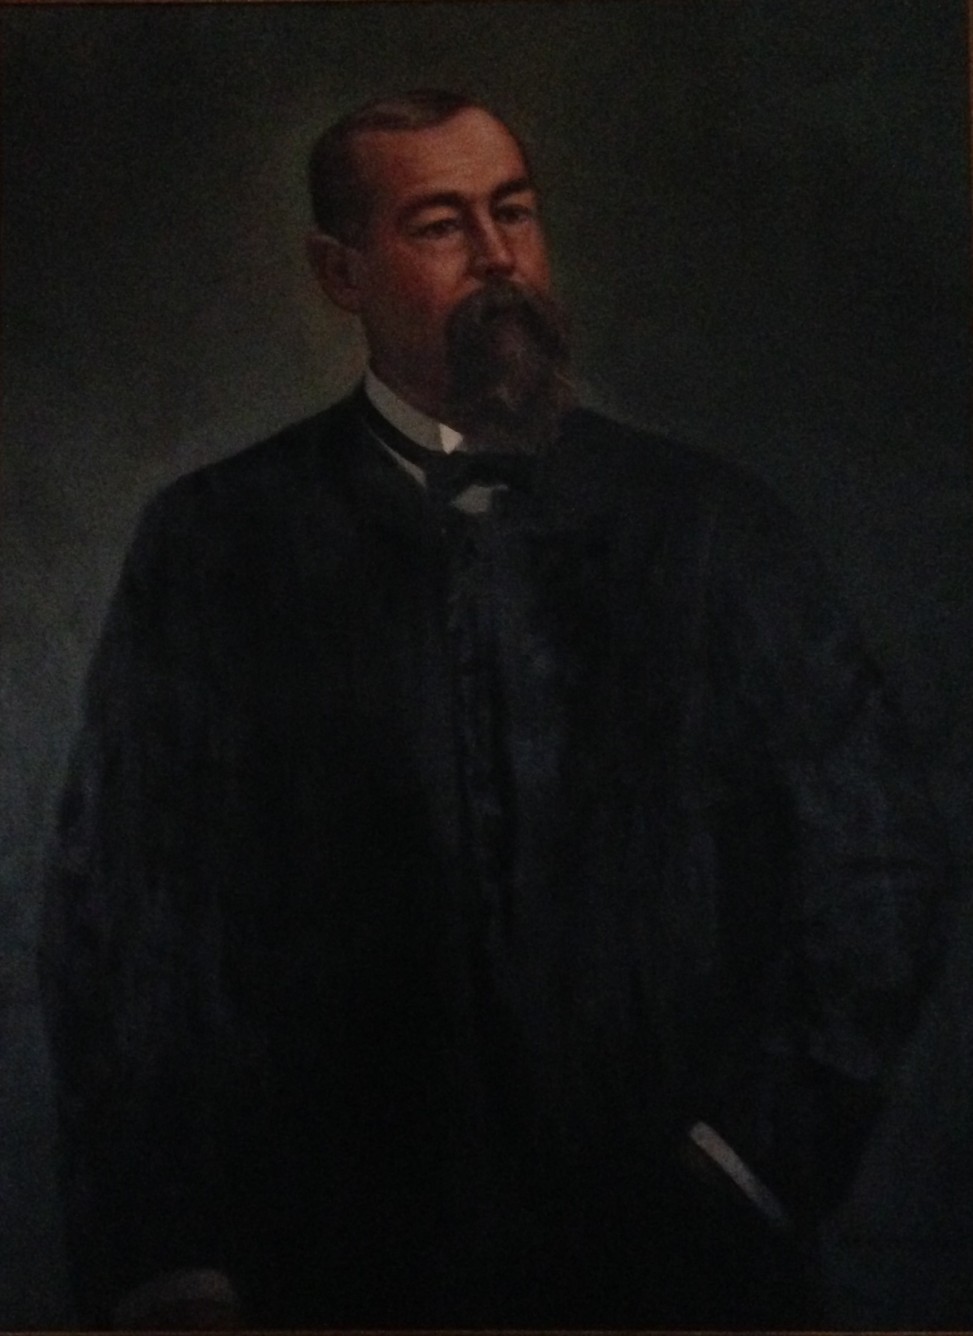 
Rev. J. W. Adkisson, 1891 – 1894;

President and Professor of Moral Science and Ancient Languages;

Bachelors, Central College;

A. M., Centenary College;

Information provided by University Archivist Louis Sherwood
